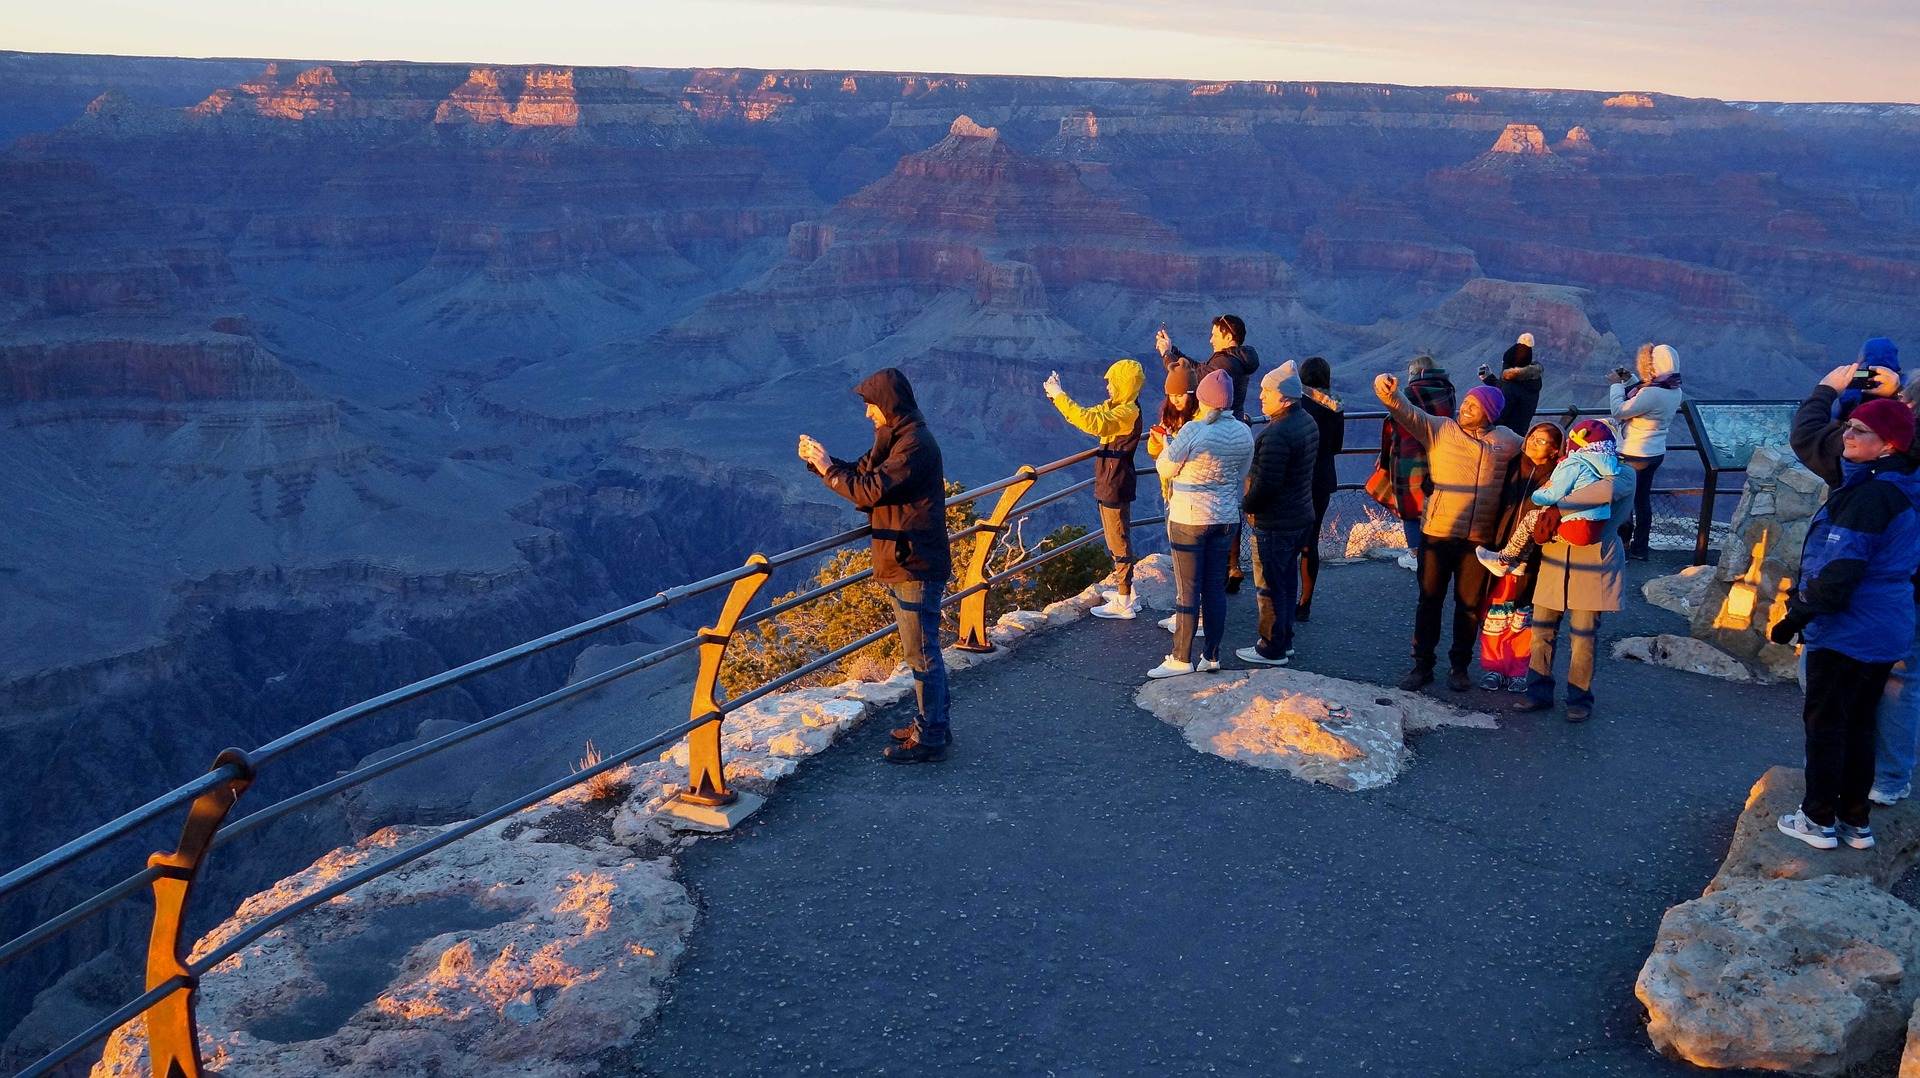 Watch the sunset at Grand Canyon in winter from Mather Point.